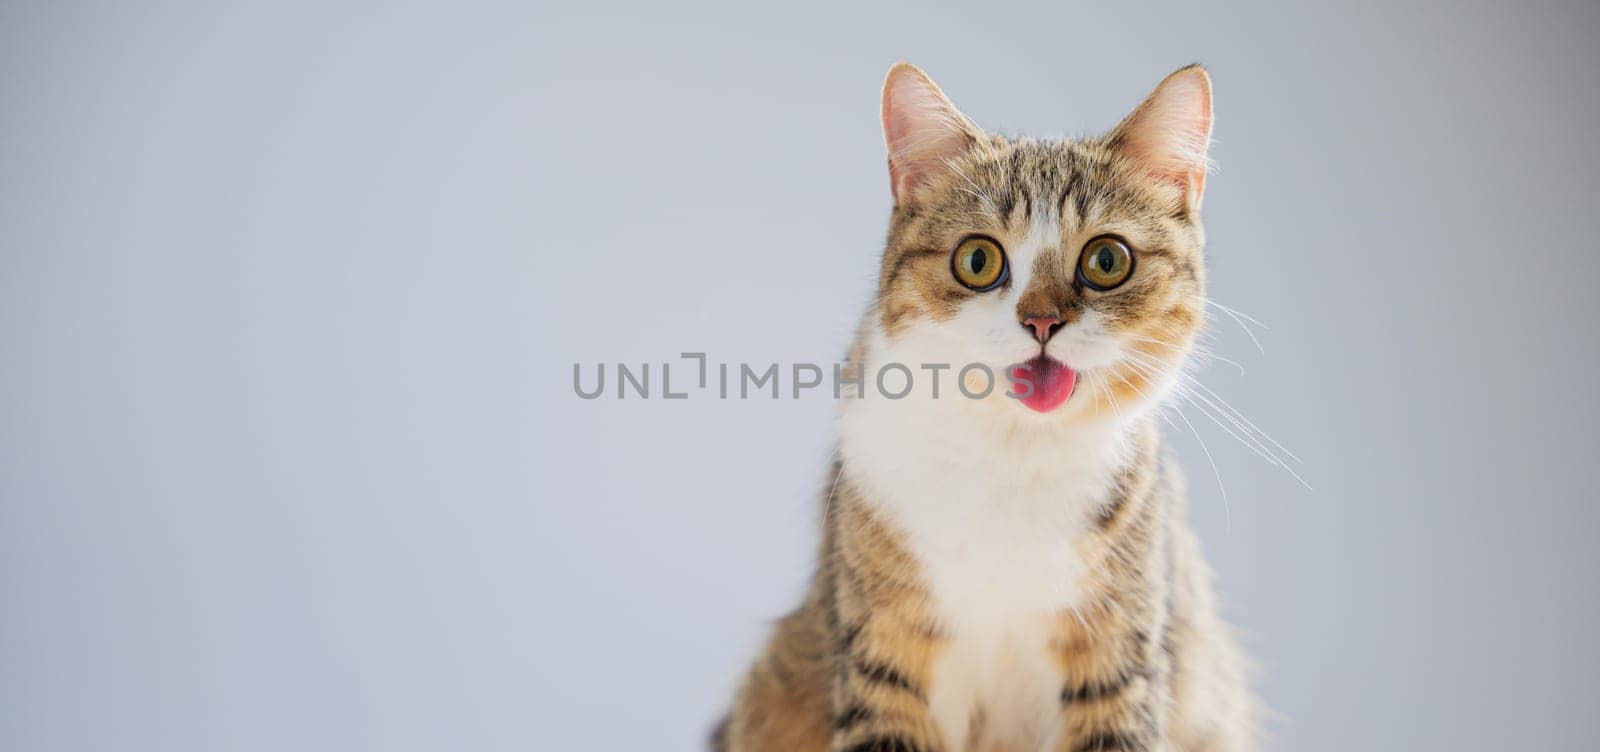 This isolated portrait features a beautiful little grey Scottish Fold cat on a white background, standing cheerfully, with a playful smile and a cute, straight tail.